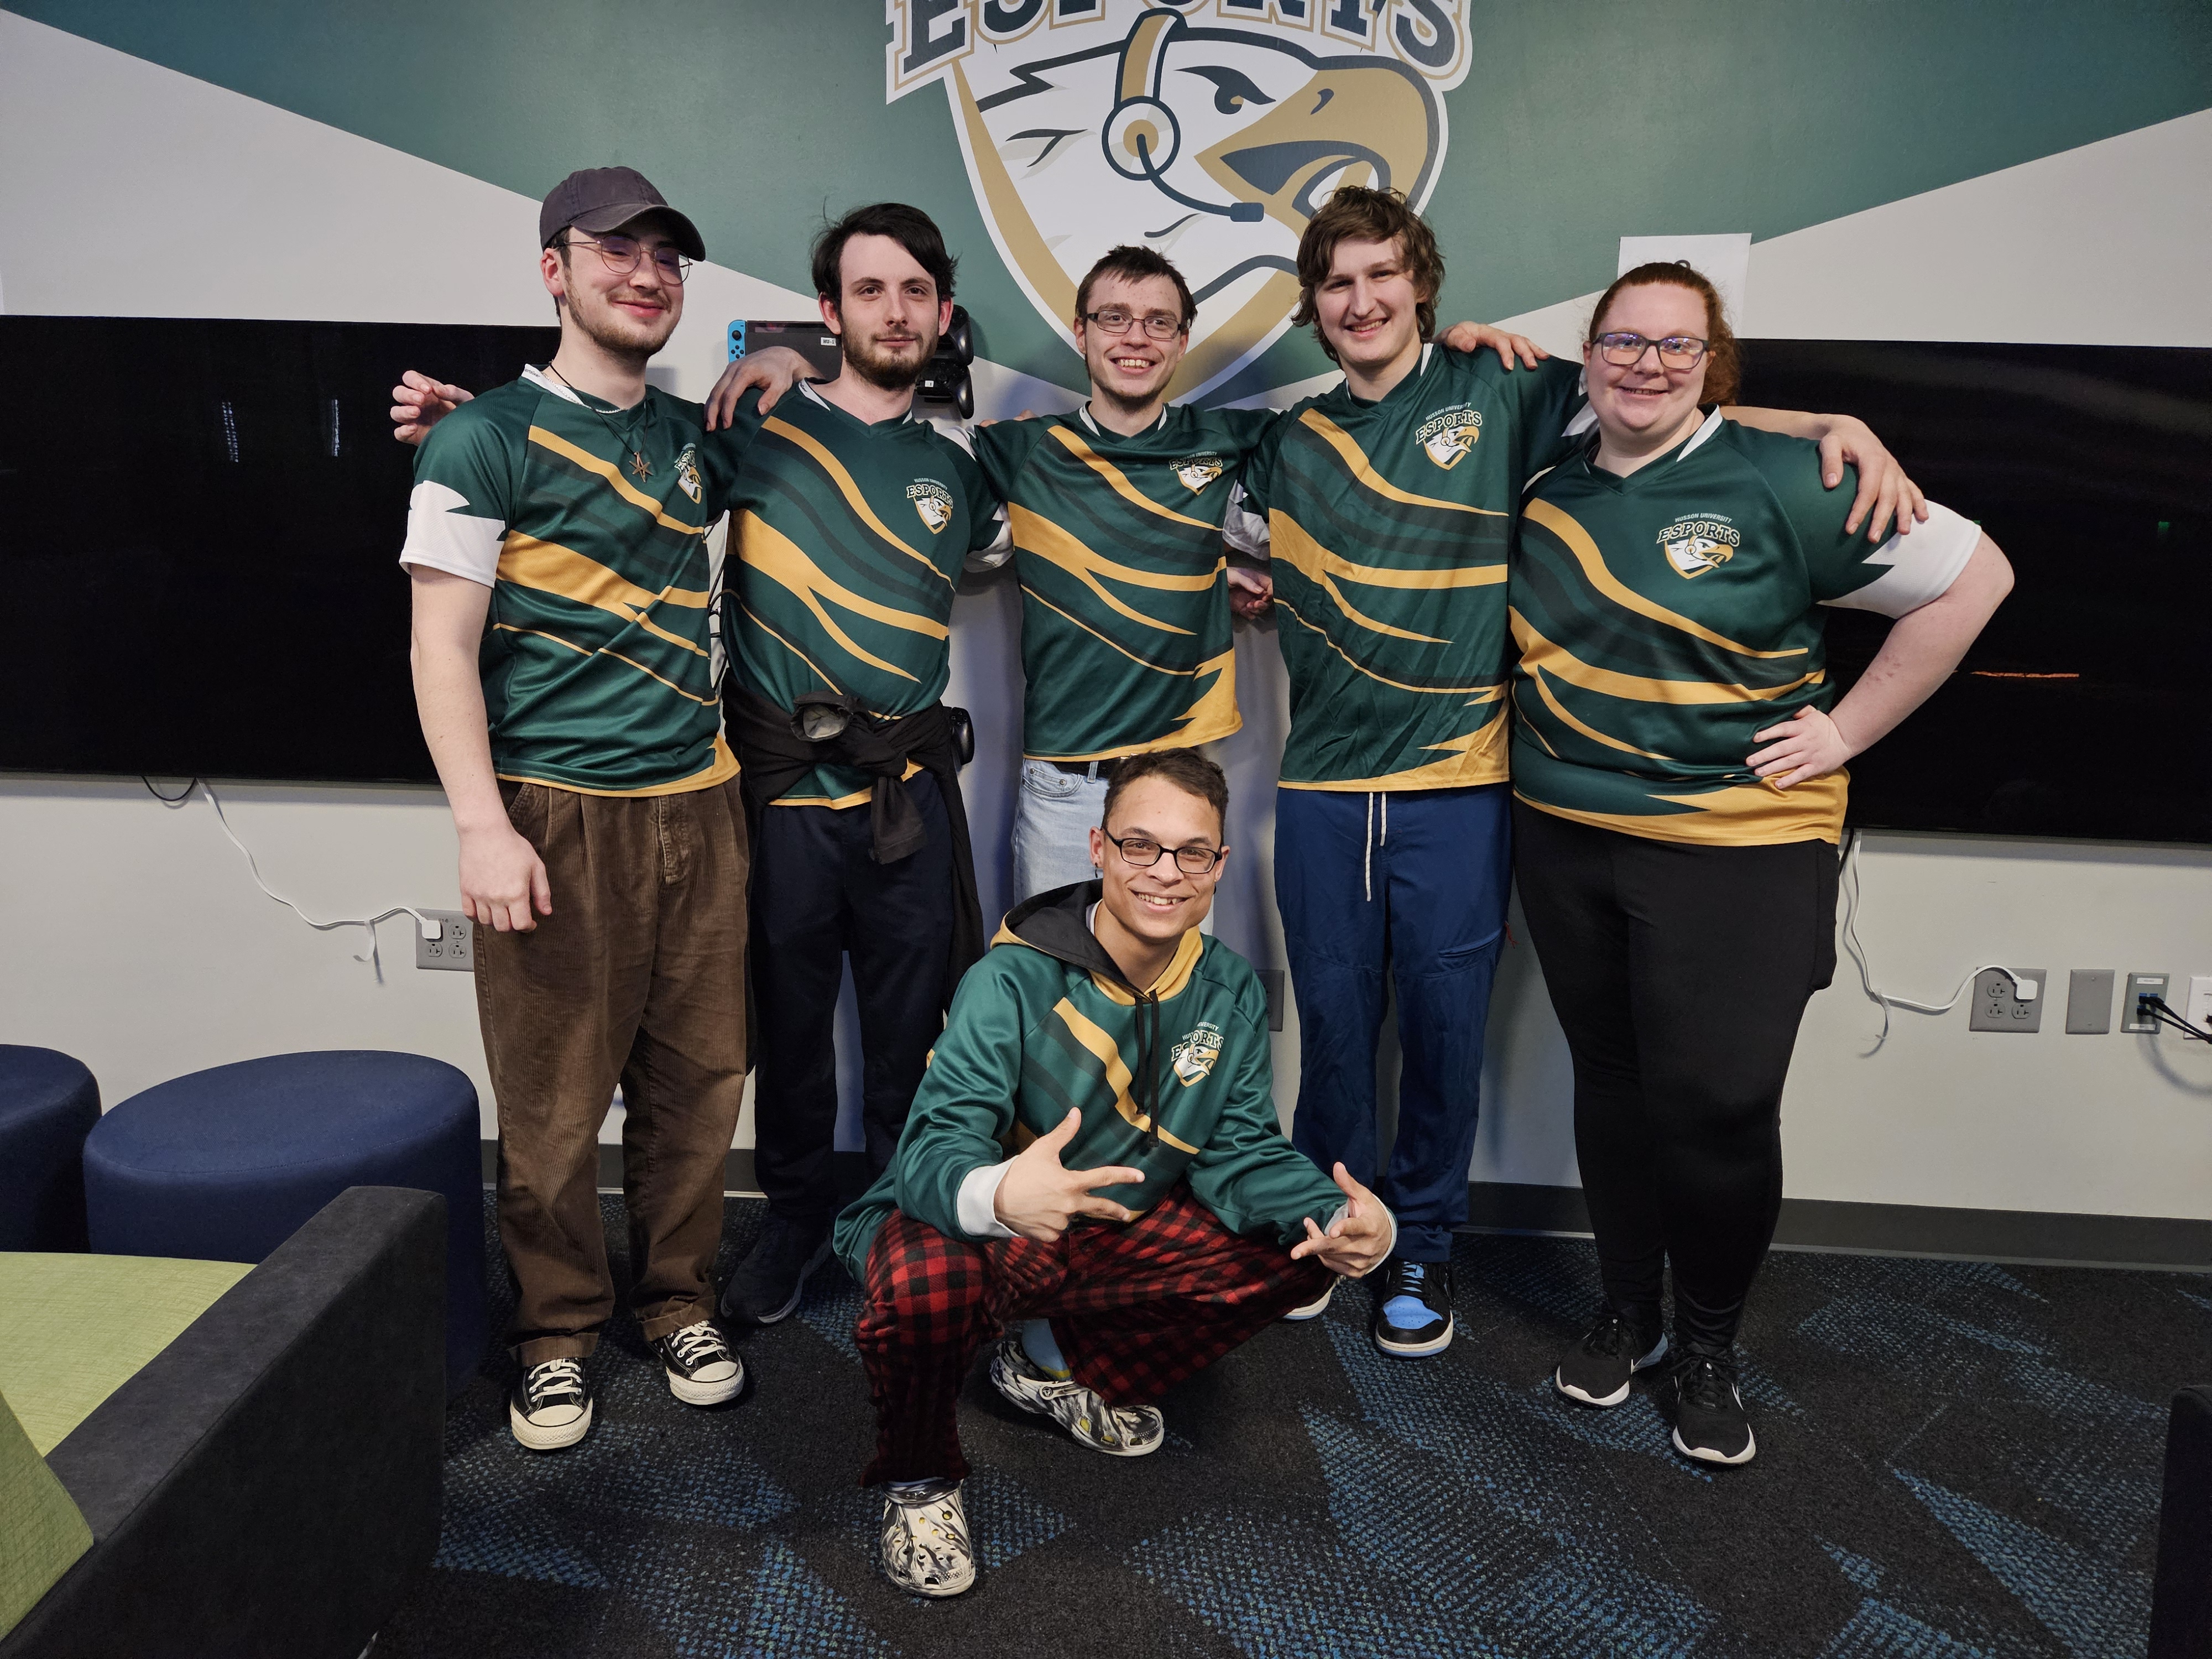 A group of six people wearing green Husson esports uniform shirts are shown.